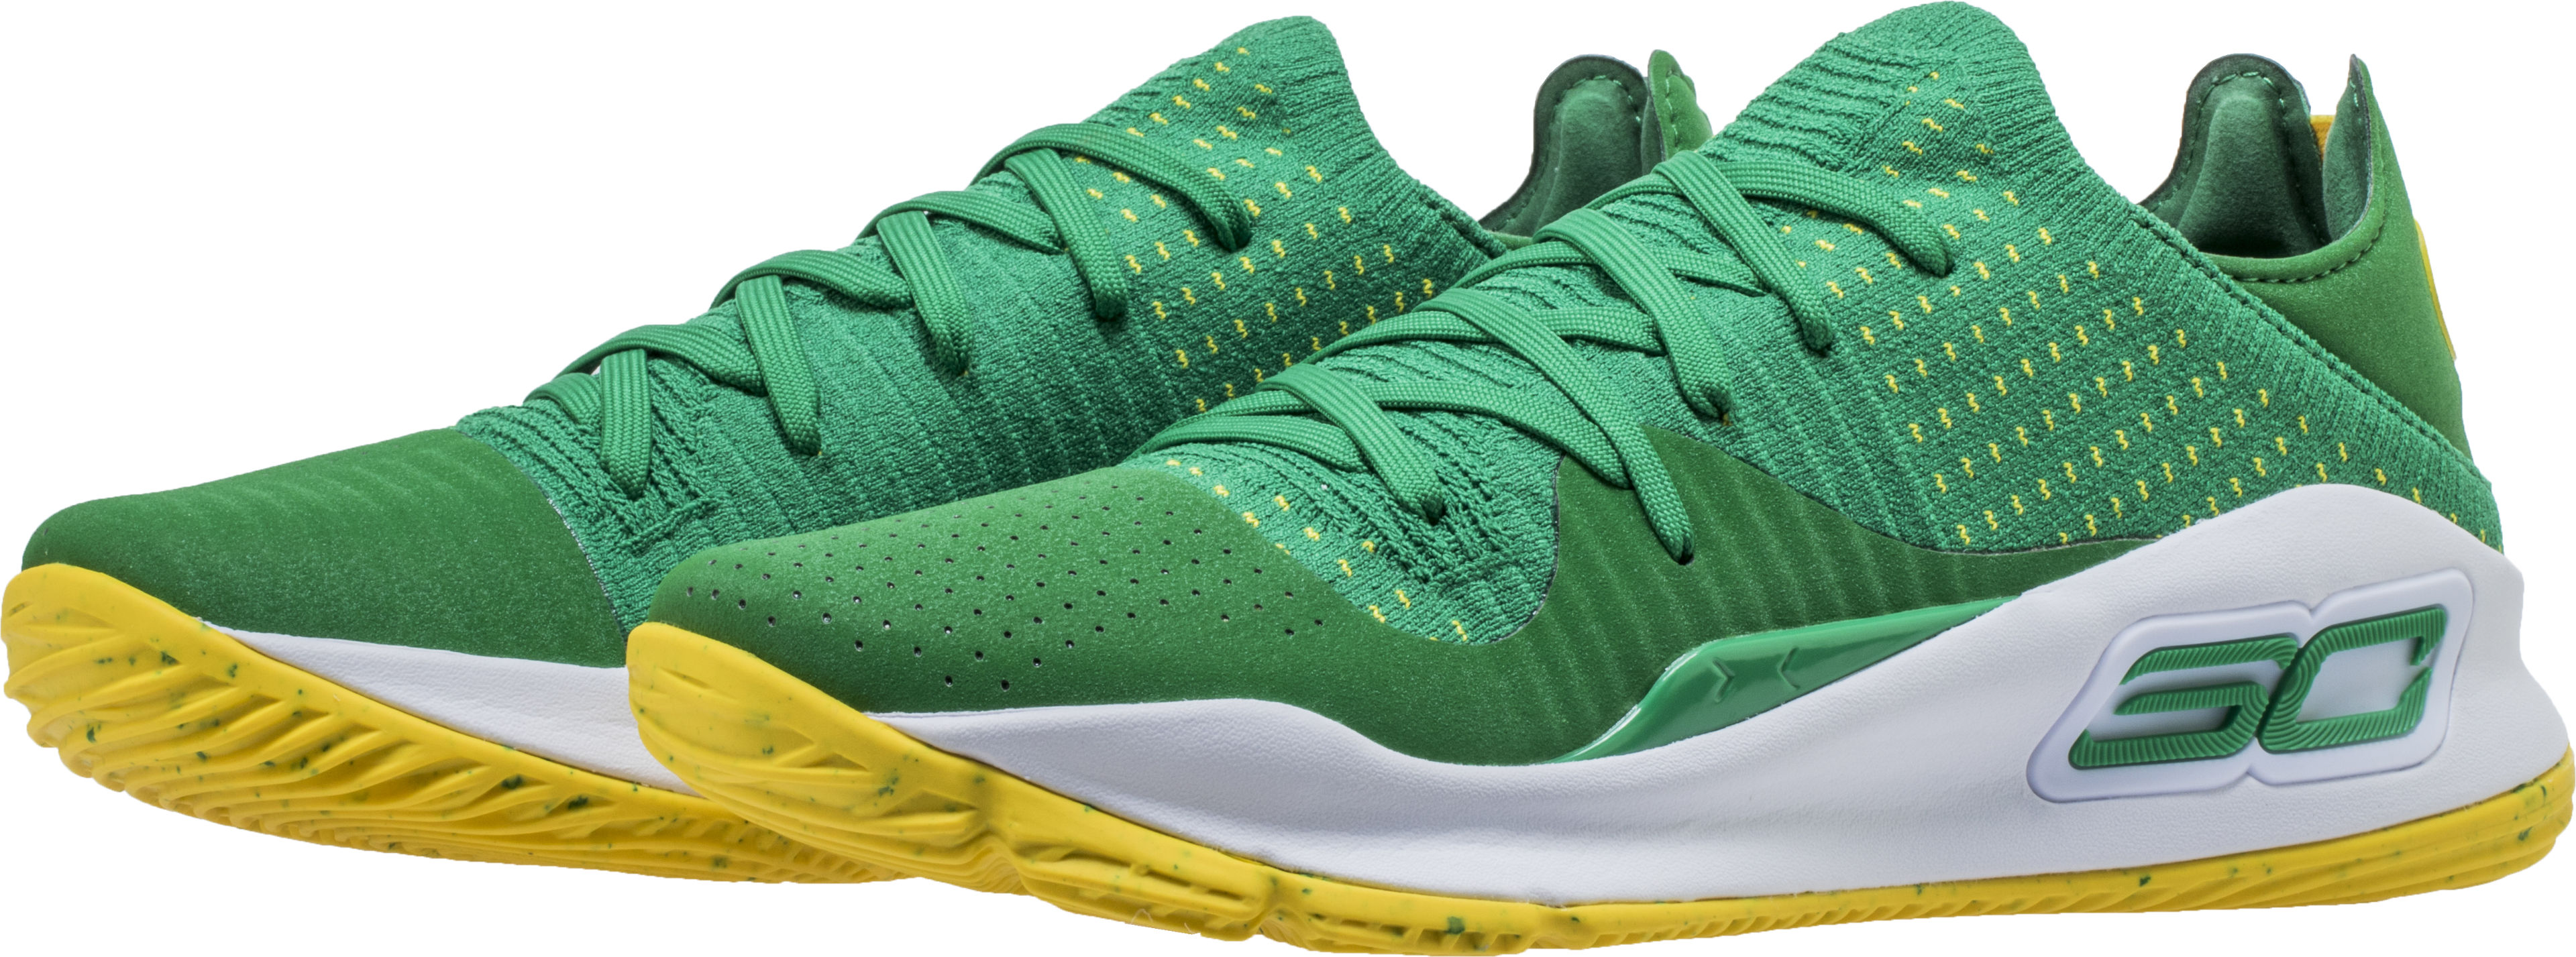 under armour curry 4 low oakland As 3